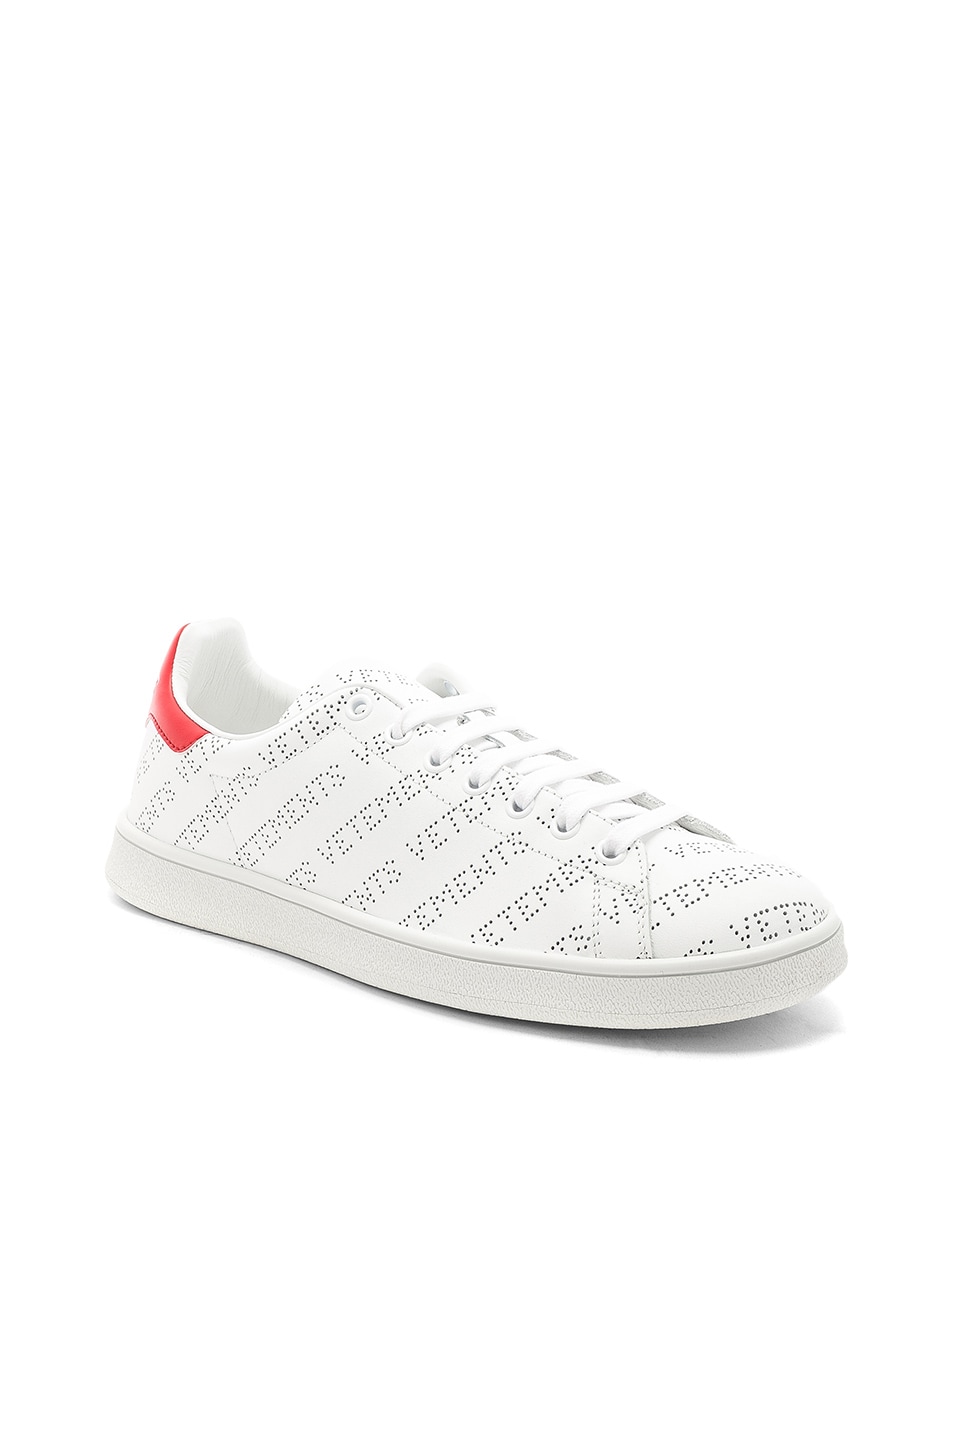 Image 1 of VETEMENTS Perforated Leather Sneakers in White & Red